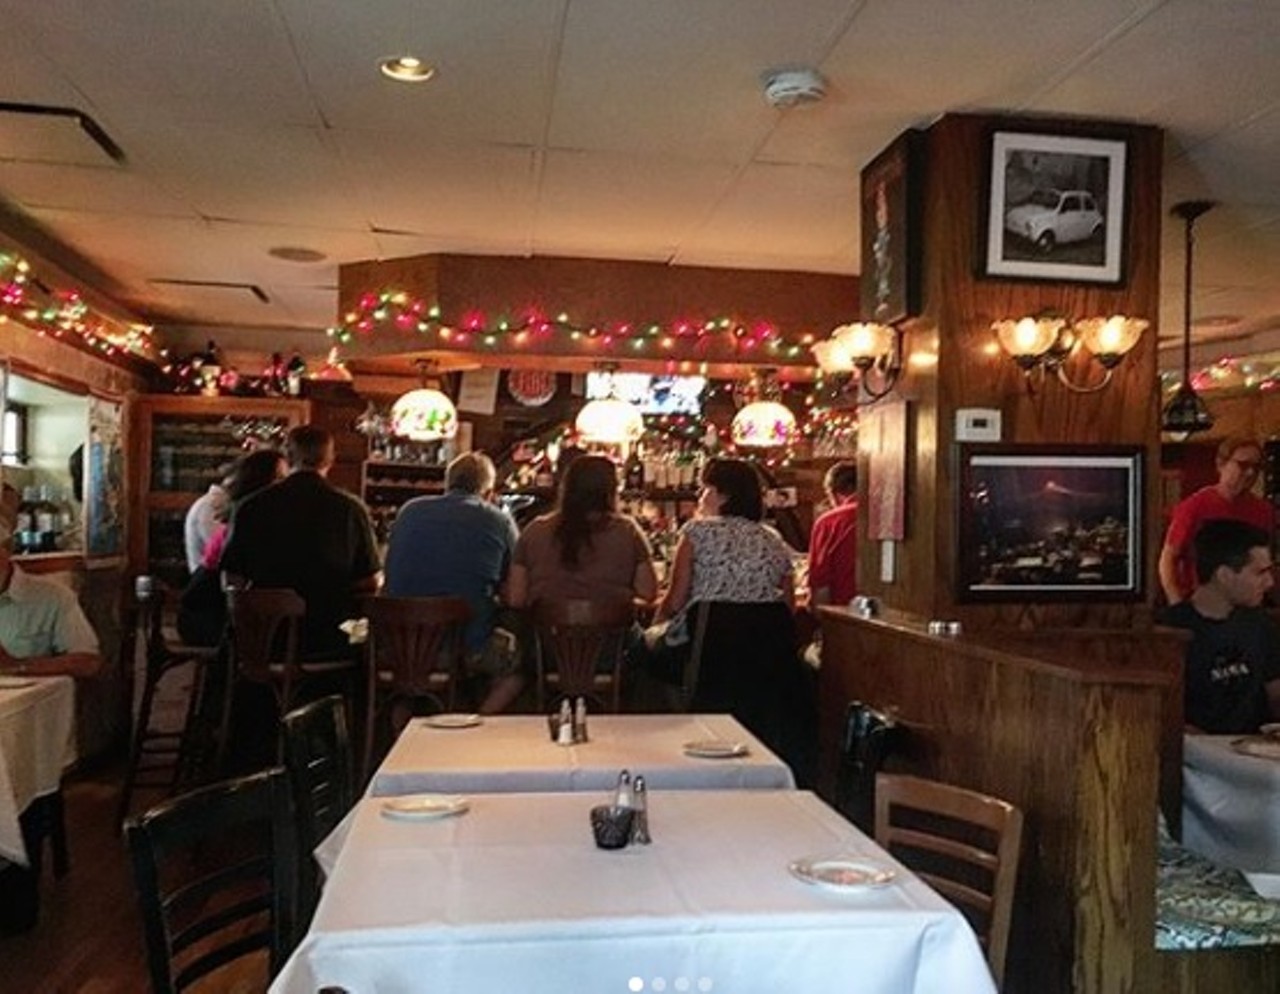 Etna 
11919 Mayfield Rd., 216-791-7670
Tucked into a corner of Little Italy, this establishment channels an &#147;old world&#148; atmosphere with its wooden bar and low ceilings. Check out their daily seafood specials and, in the summer, their outdoor seating options.  
Photo via heidilynn88/Instagram